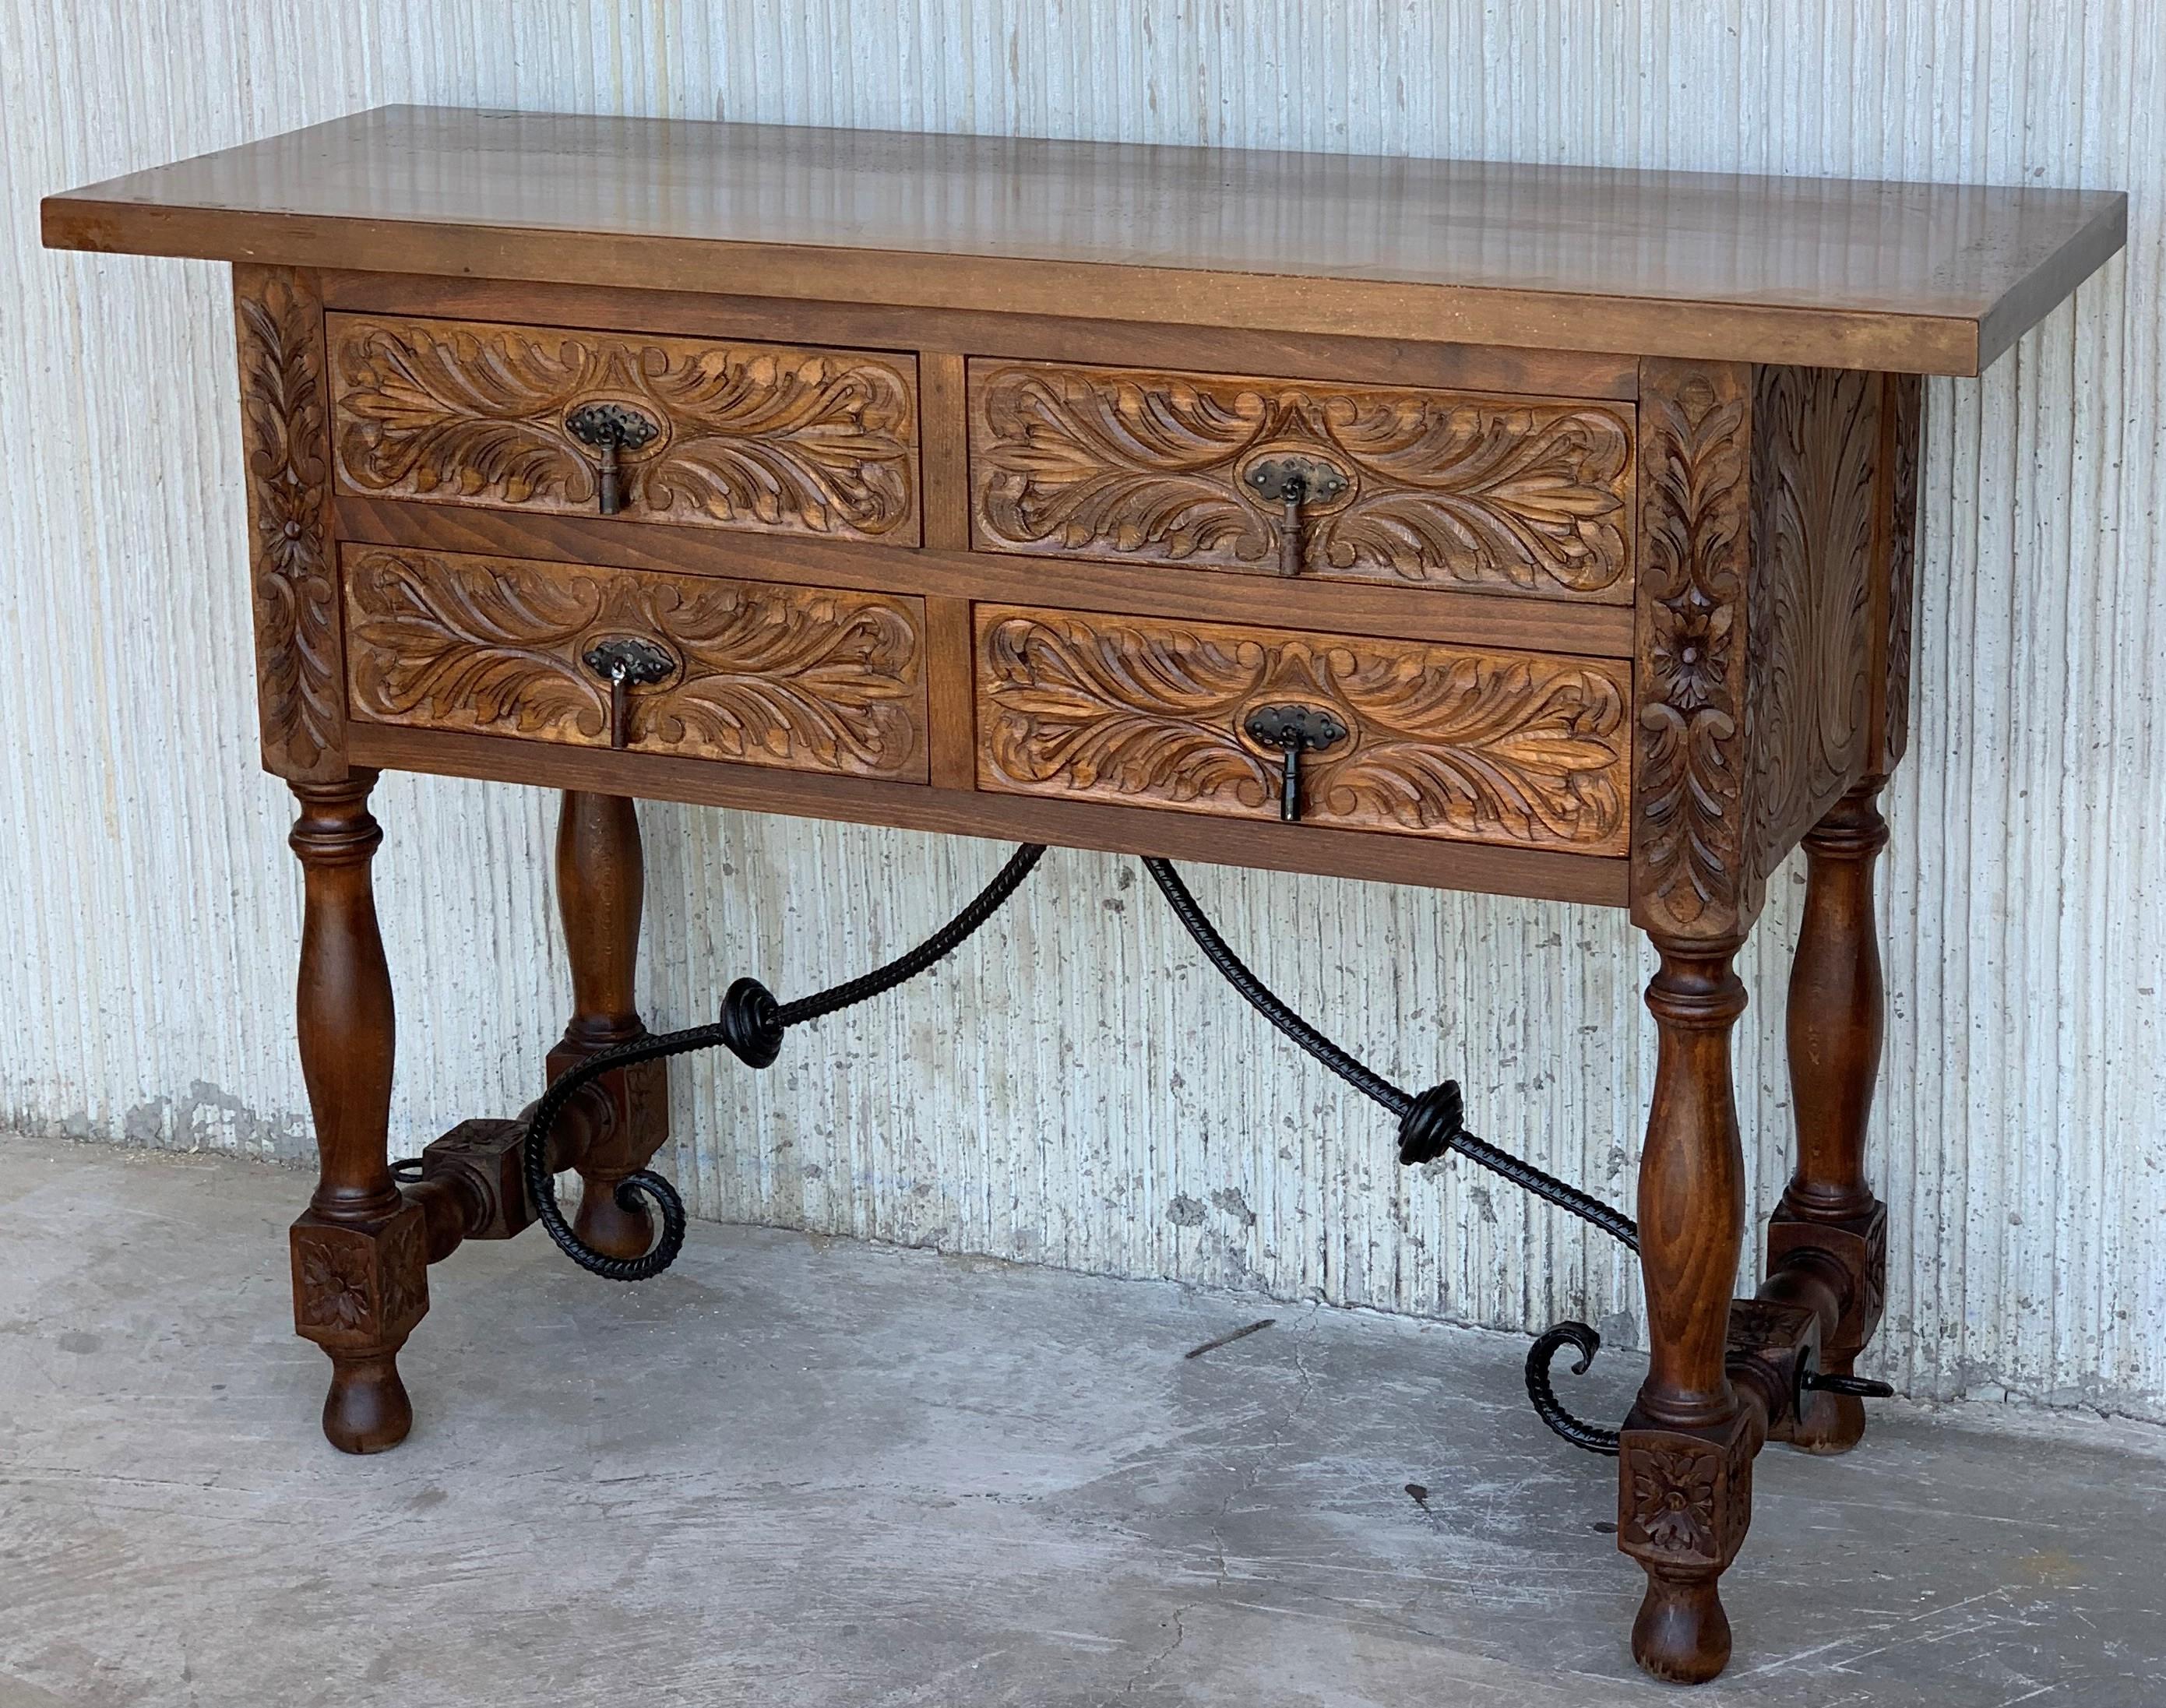 Hand-Carved Catalan Spanish Carved Walnut Console Sofa Table, Four Drawers & Iron Stretcher